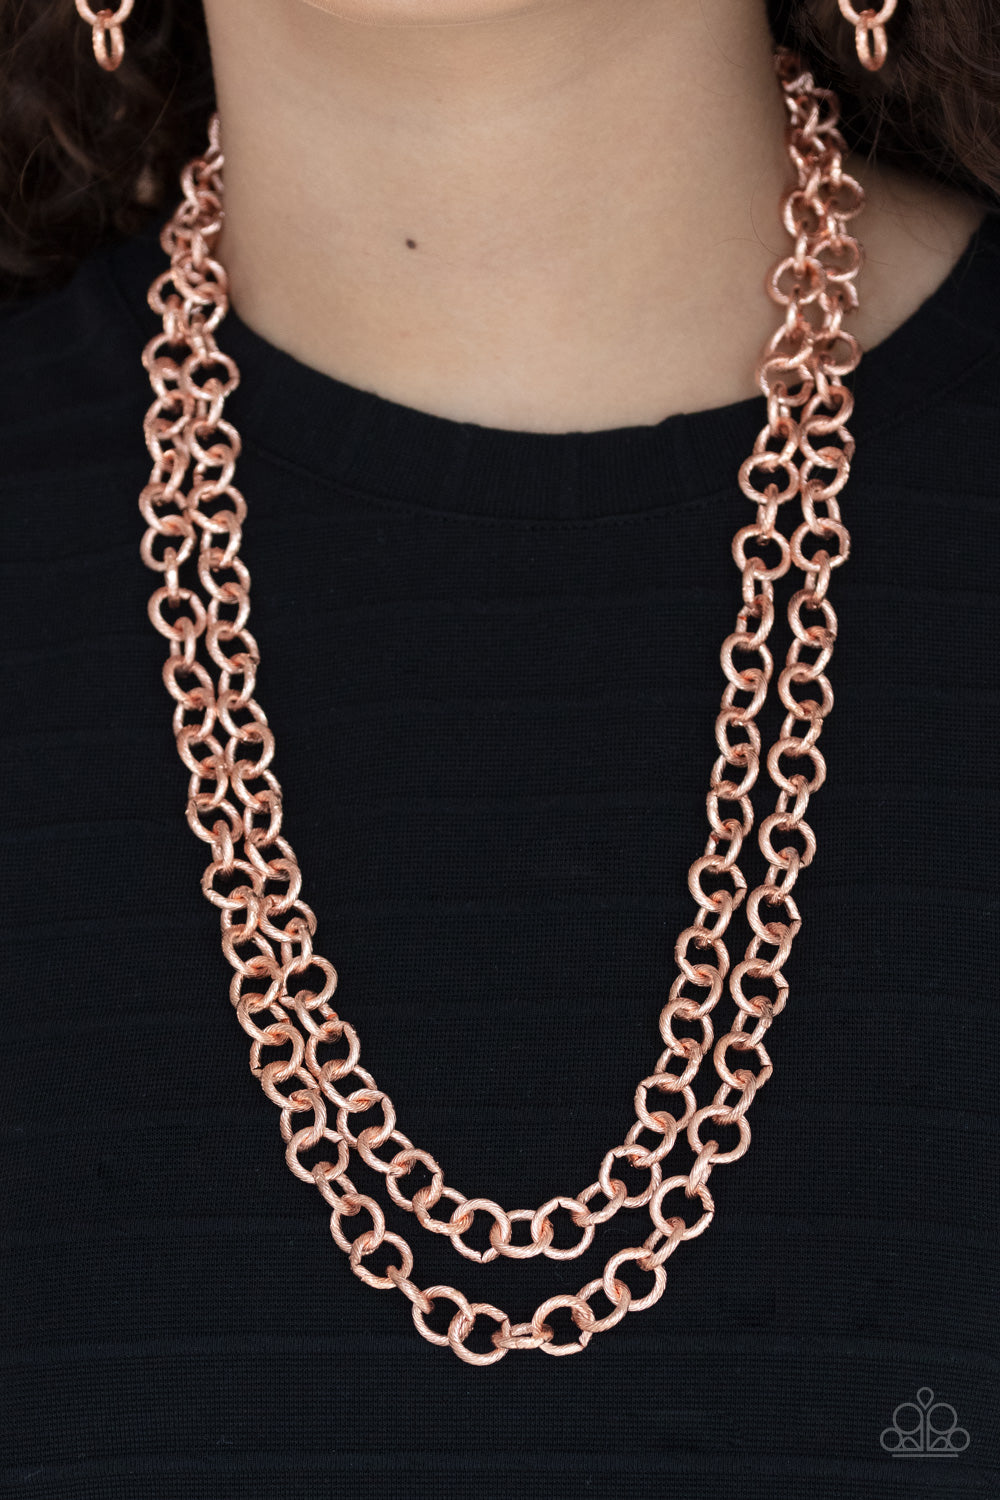 PRE-ORDER - Paparazzi Grunge Goals - Copper - Necklace & Earrings - $5 Jewelry with Ashley Swint